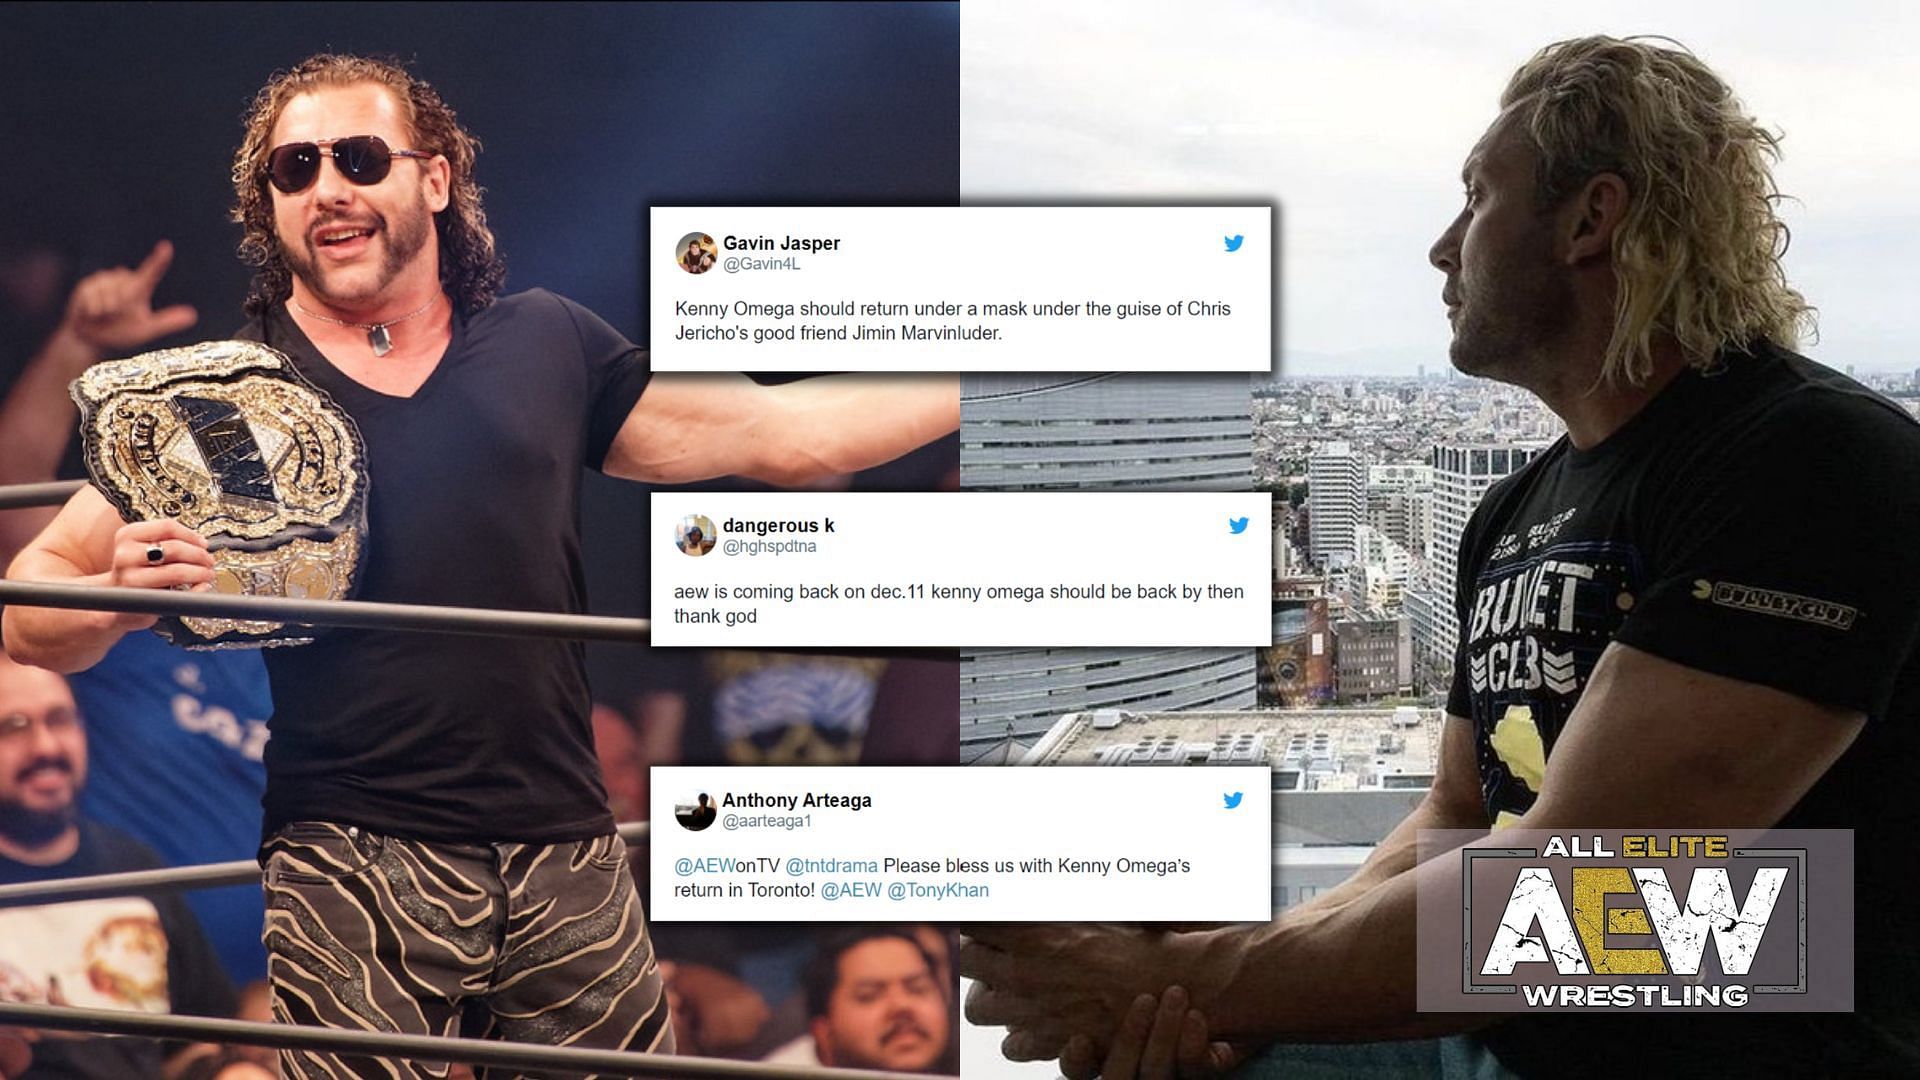 Will Kenny Omega return to action anytime soon?